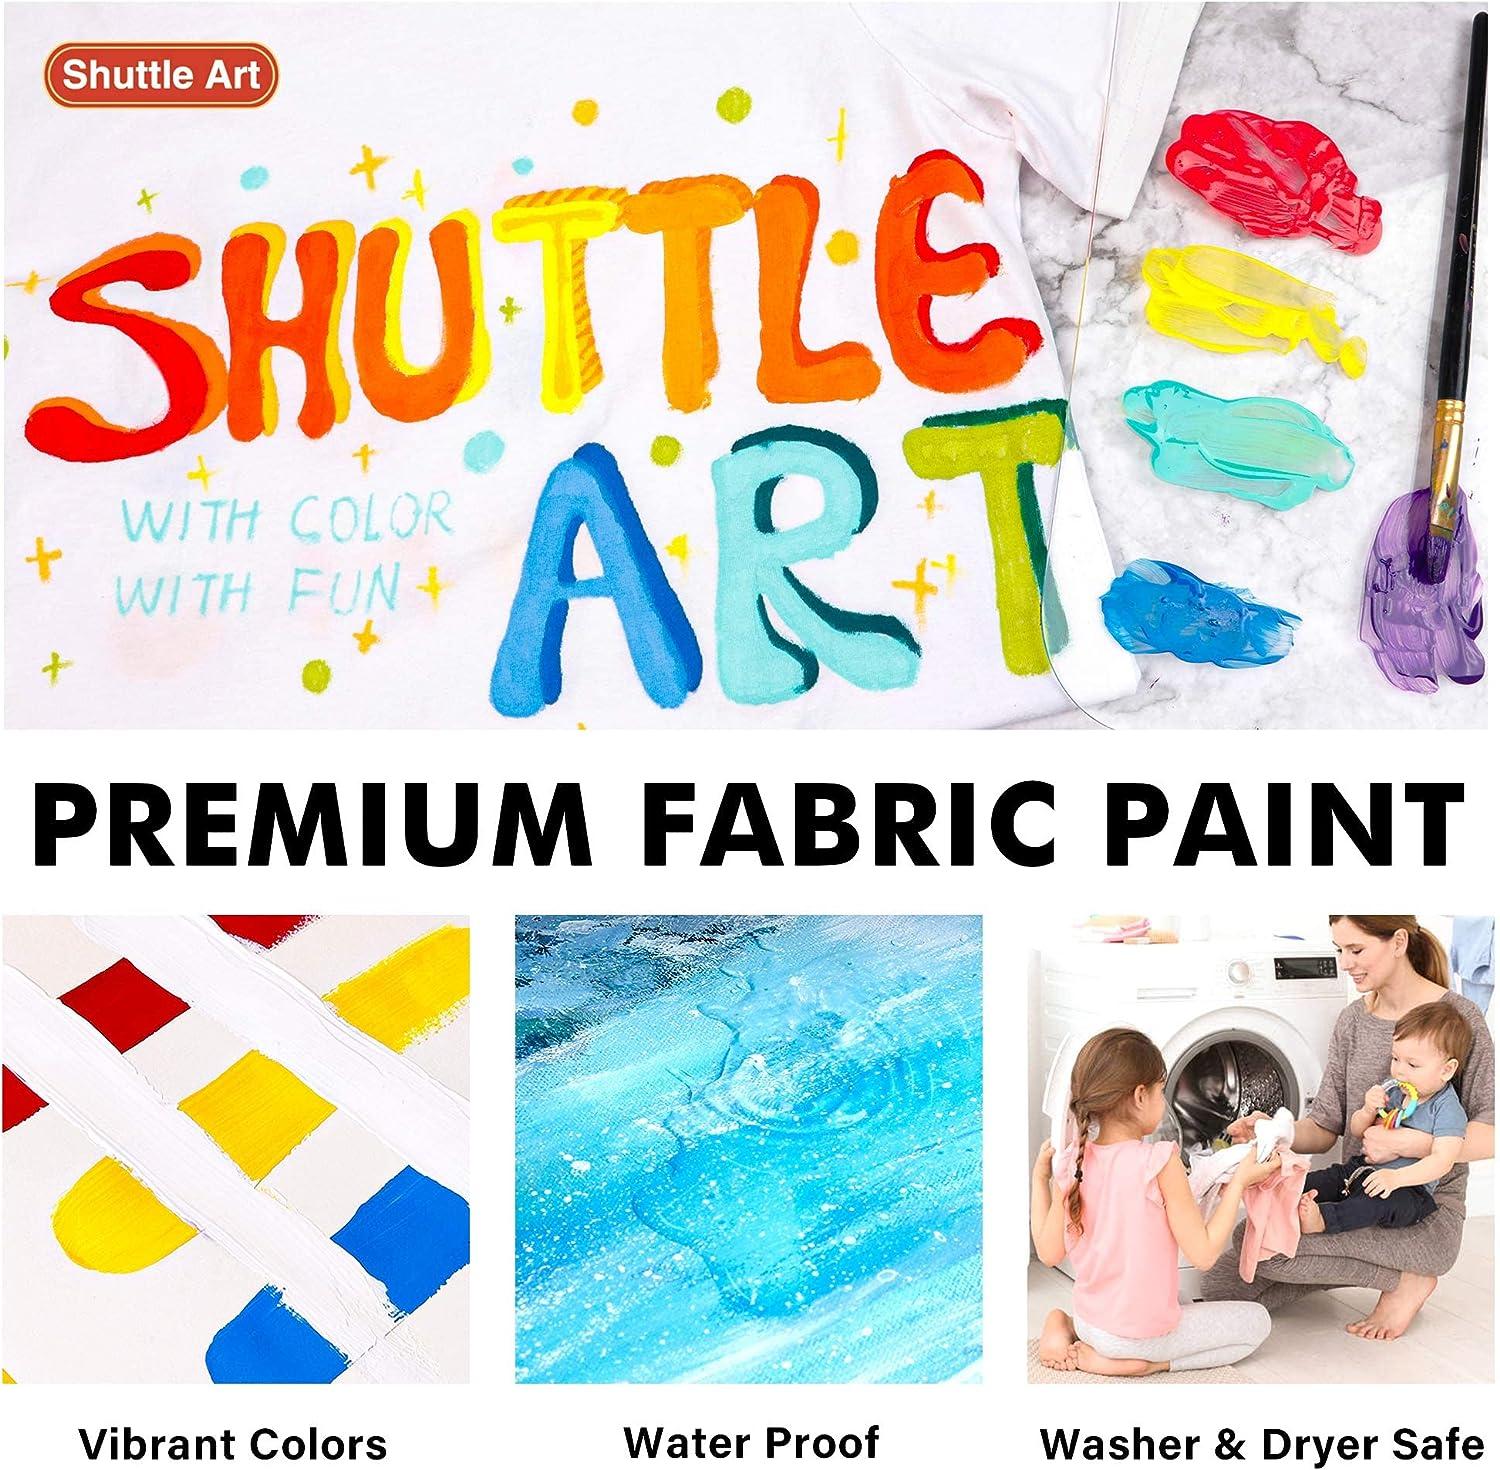 Metallic Fabric Paint, Shuttle Art 18 Metallic Colors Permanent Soft Fabric  Paint in Bottles (60ml/2oz) with Brush and Stencils, Non-Toxic Textile